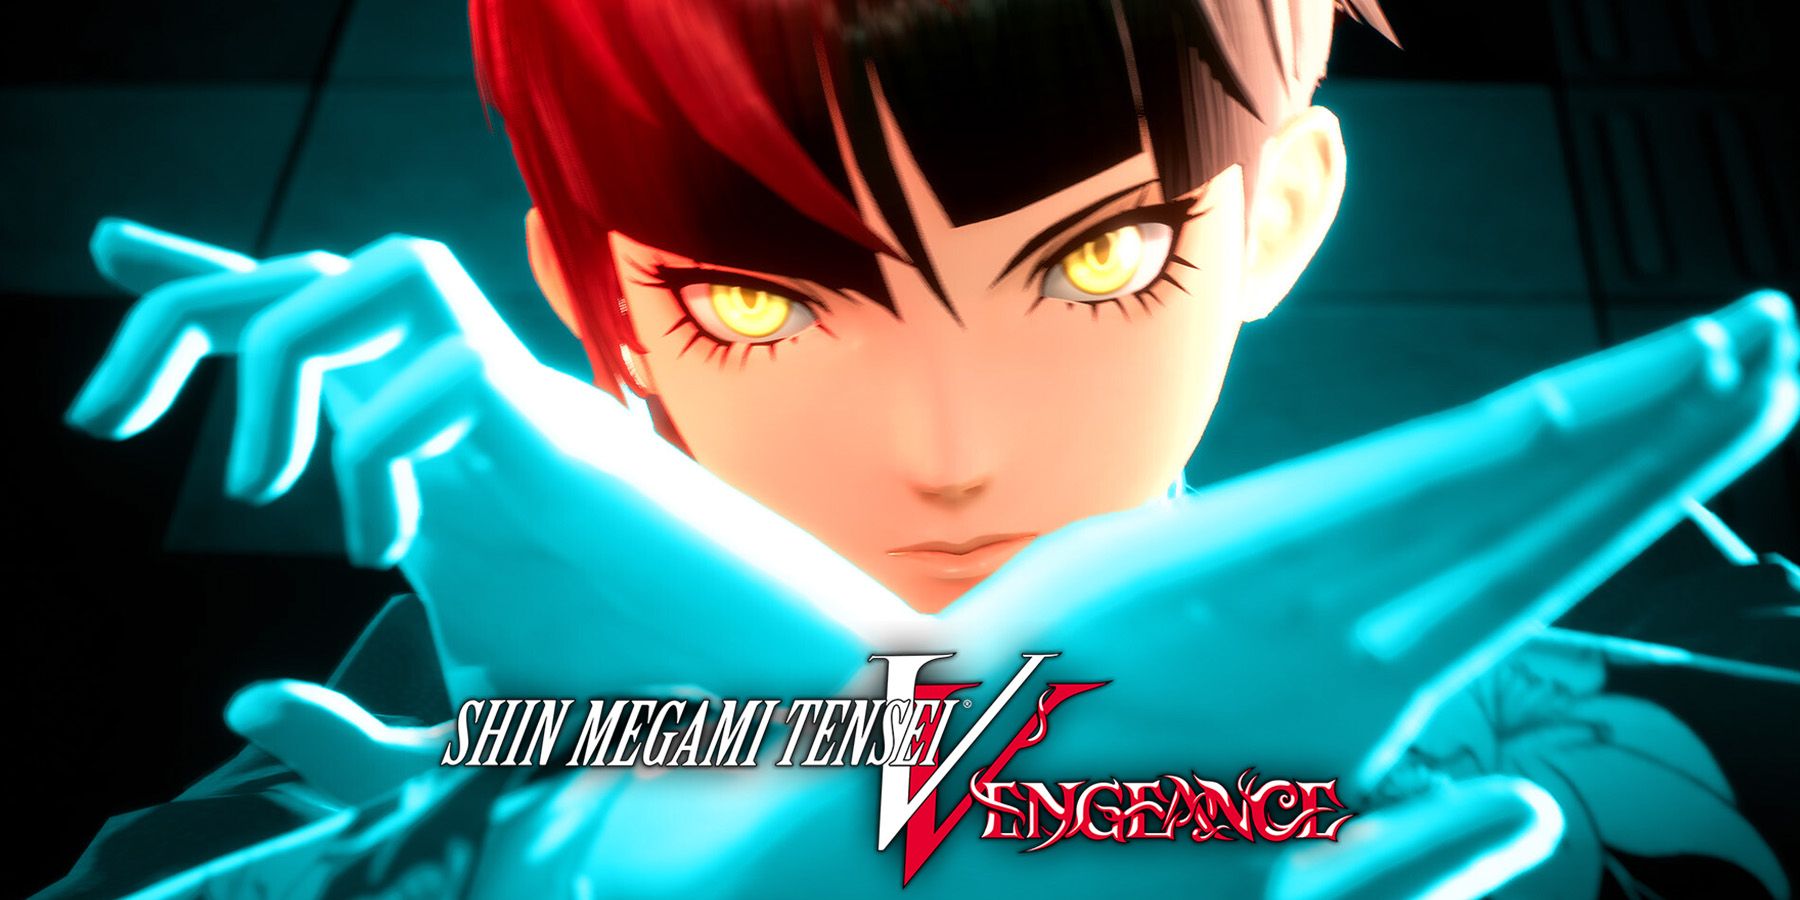 Shin Megami Tensei 5 SMT5 Vengeance Nahobino crossed hands with selective blue color filter and game logo